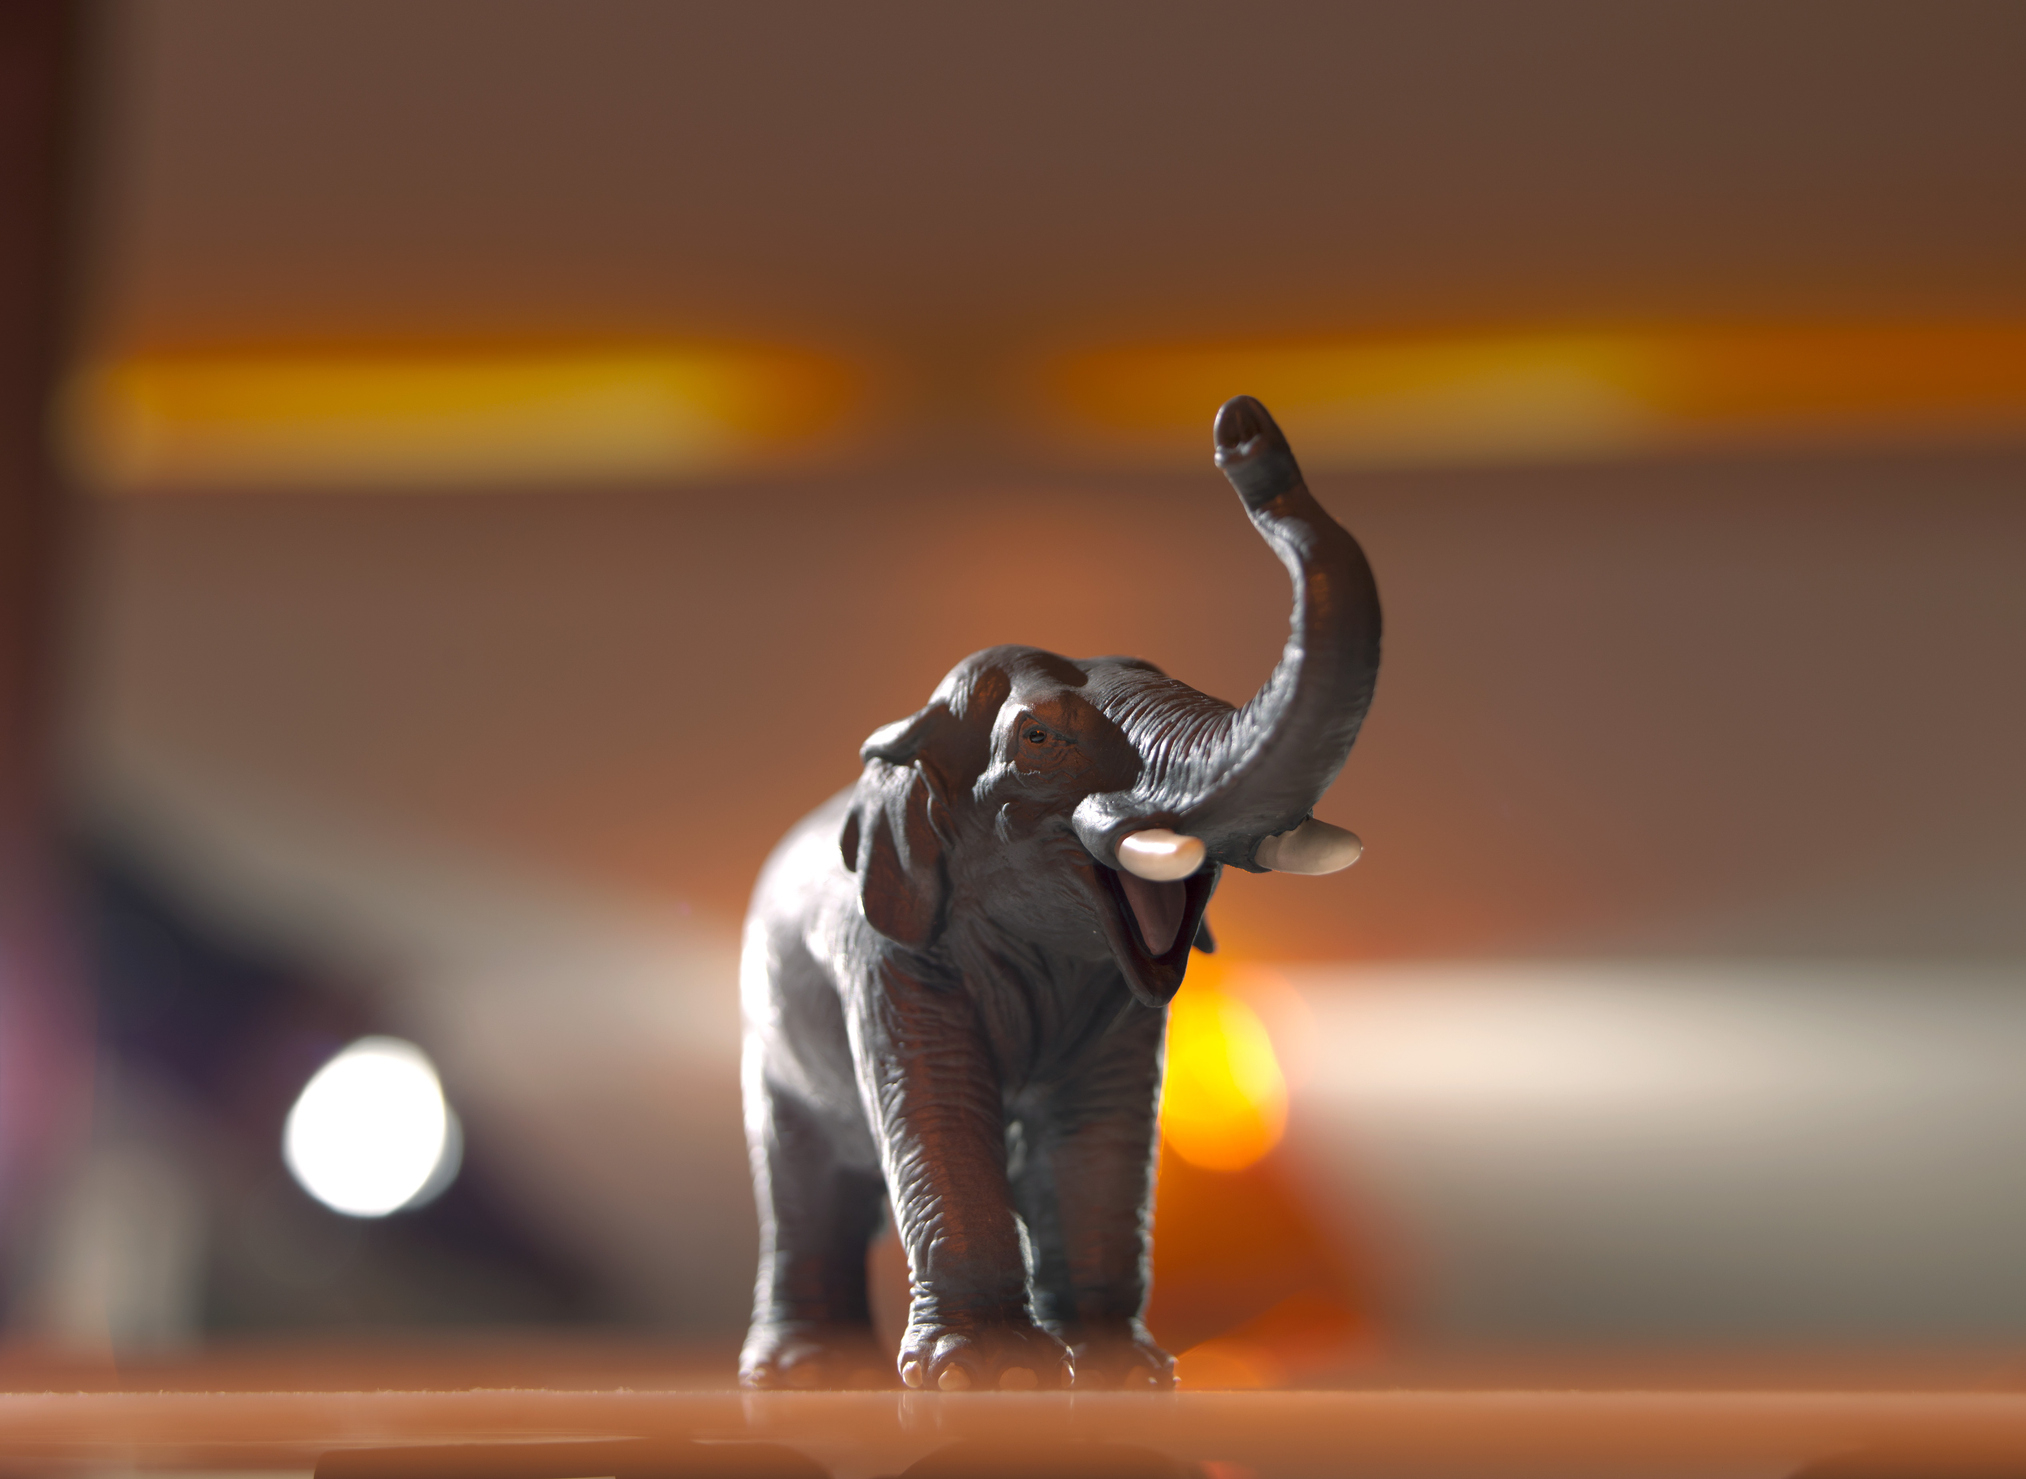 Small elephant figurine with raised trunk on a surface, backlit by warm lighting